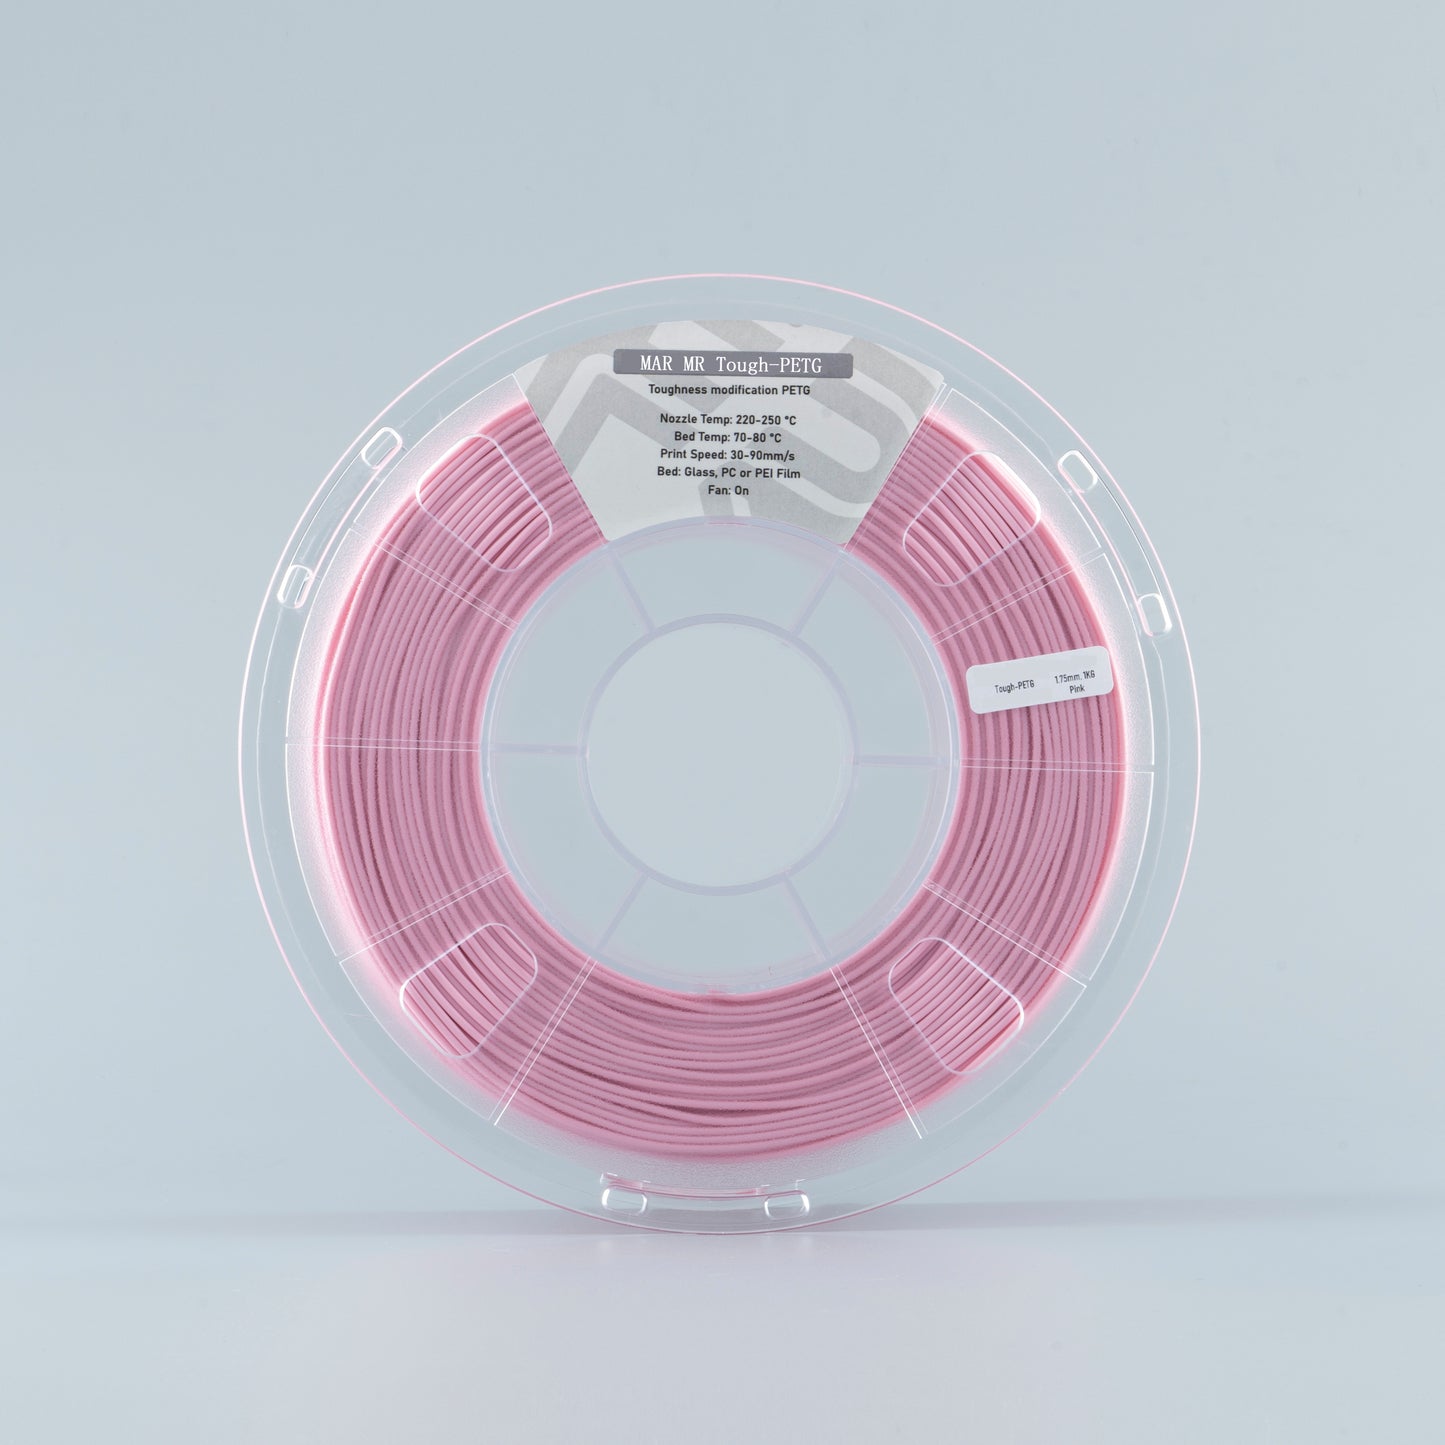 Mayrc MR-Tough-PETG Pink 3D printing material 10kg High Flow Toughness Modification PETG for Can Handle